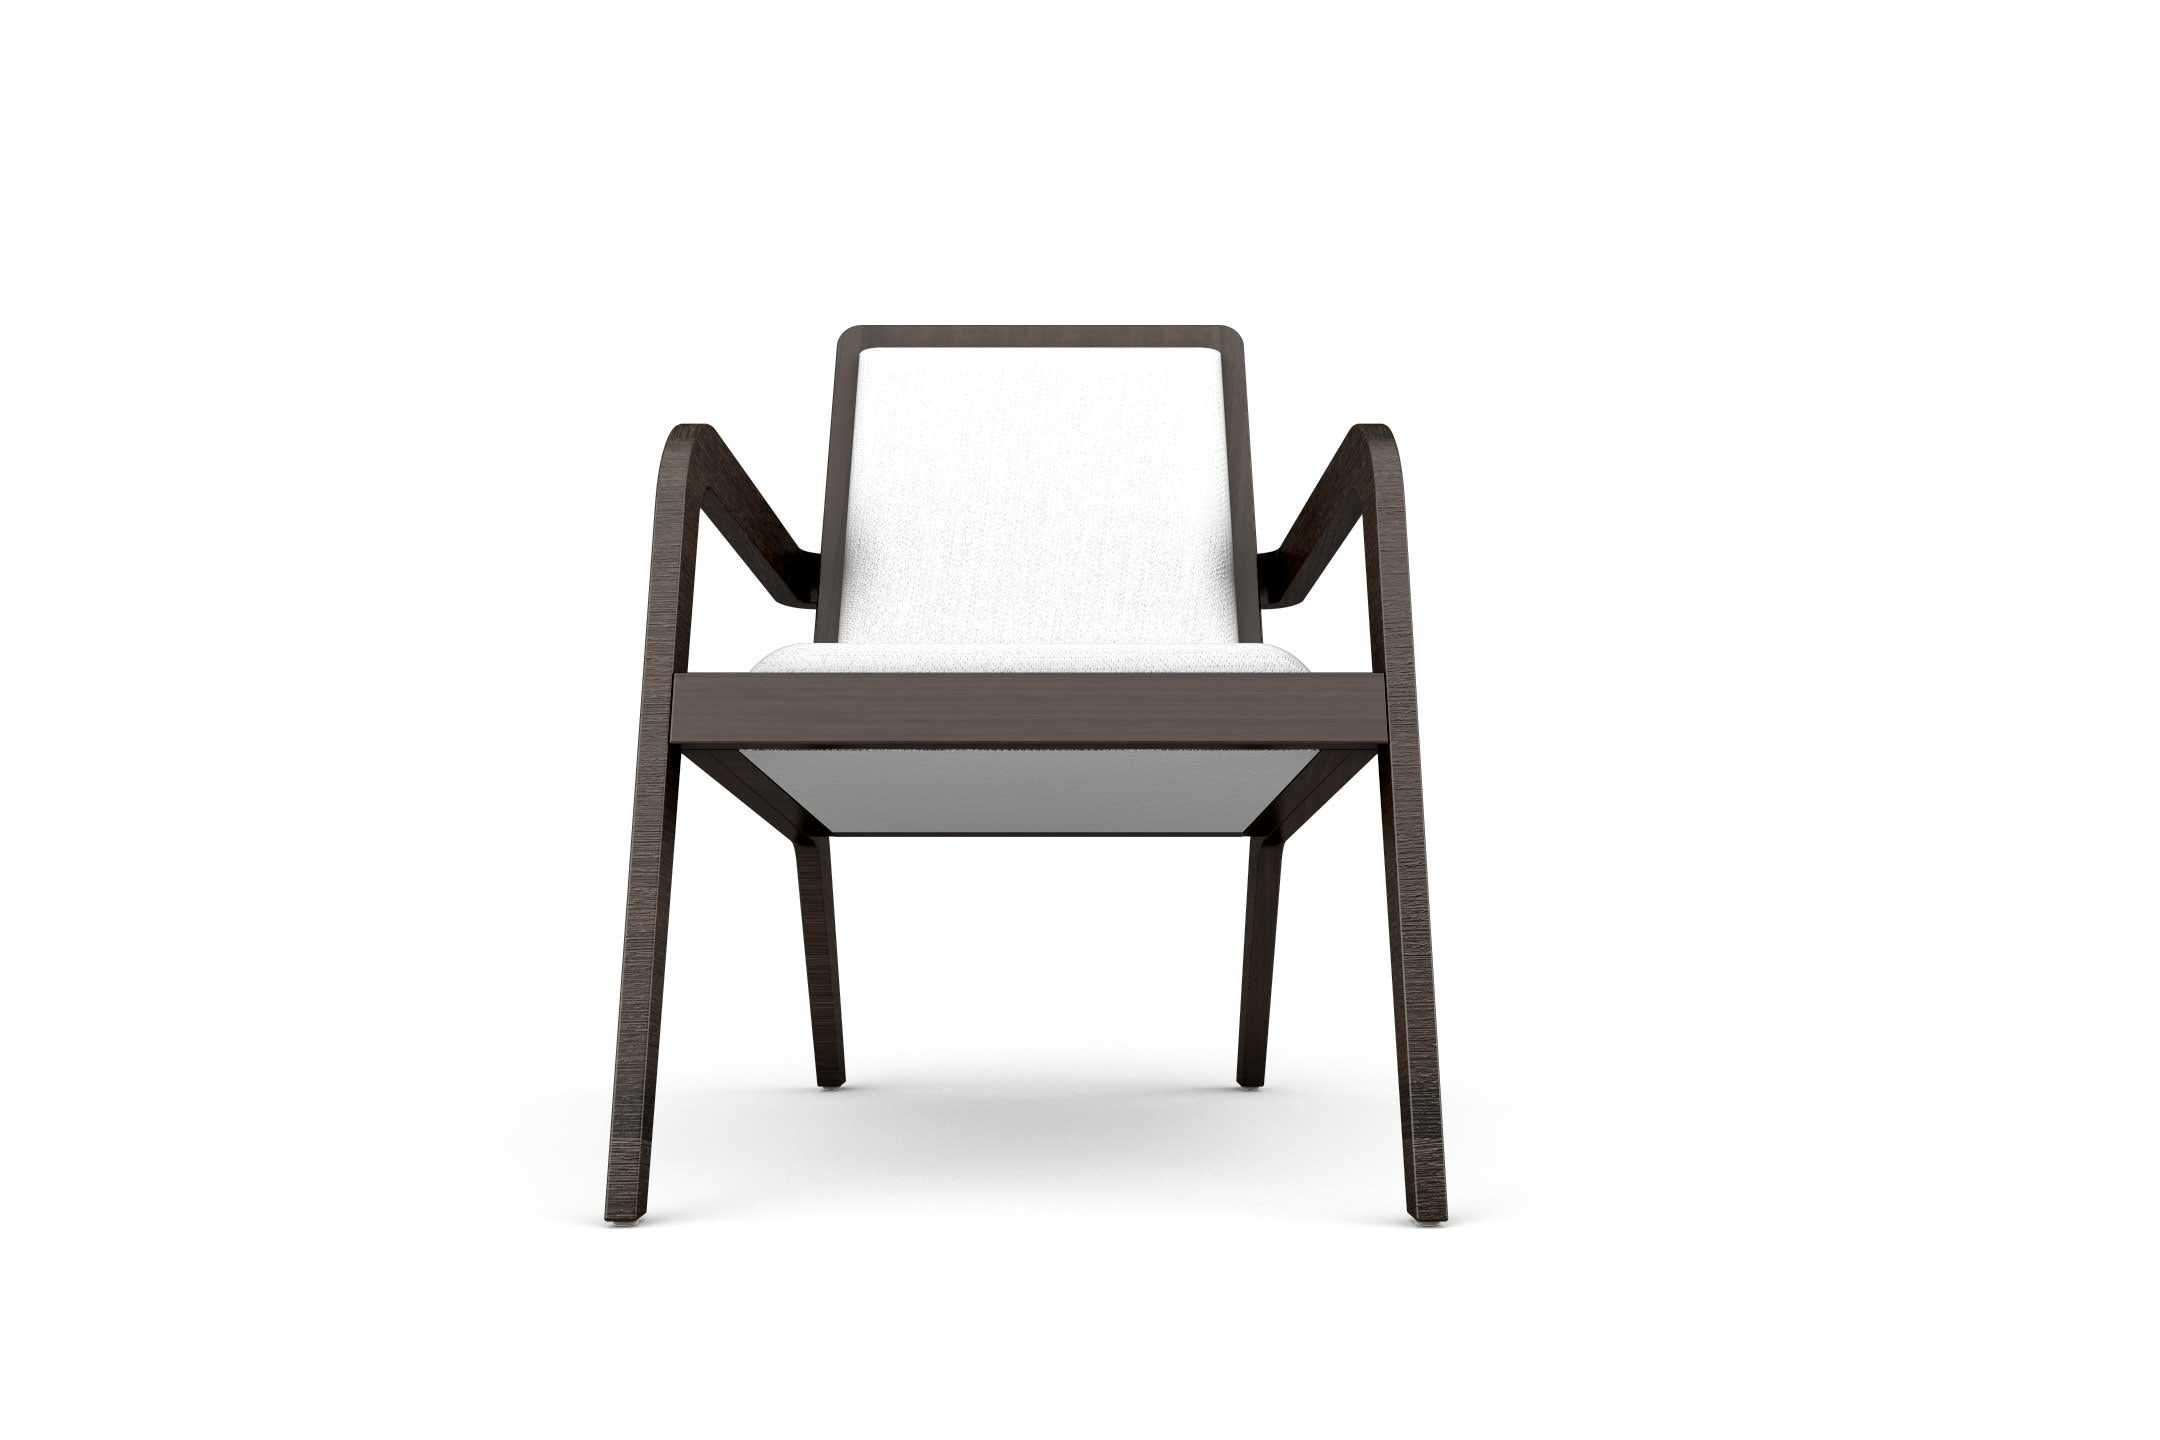 The Umbra armchair has an embracing and minimalistic design, playing with slim silhouettes and contrasts it gives a sense of comfort to the eye. Its structure is shaped from stained wood with an upholstered seat and back which can be completely